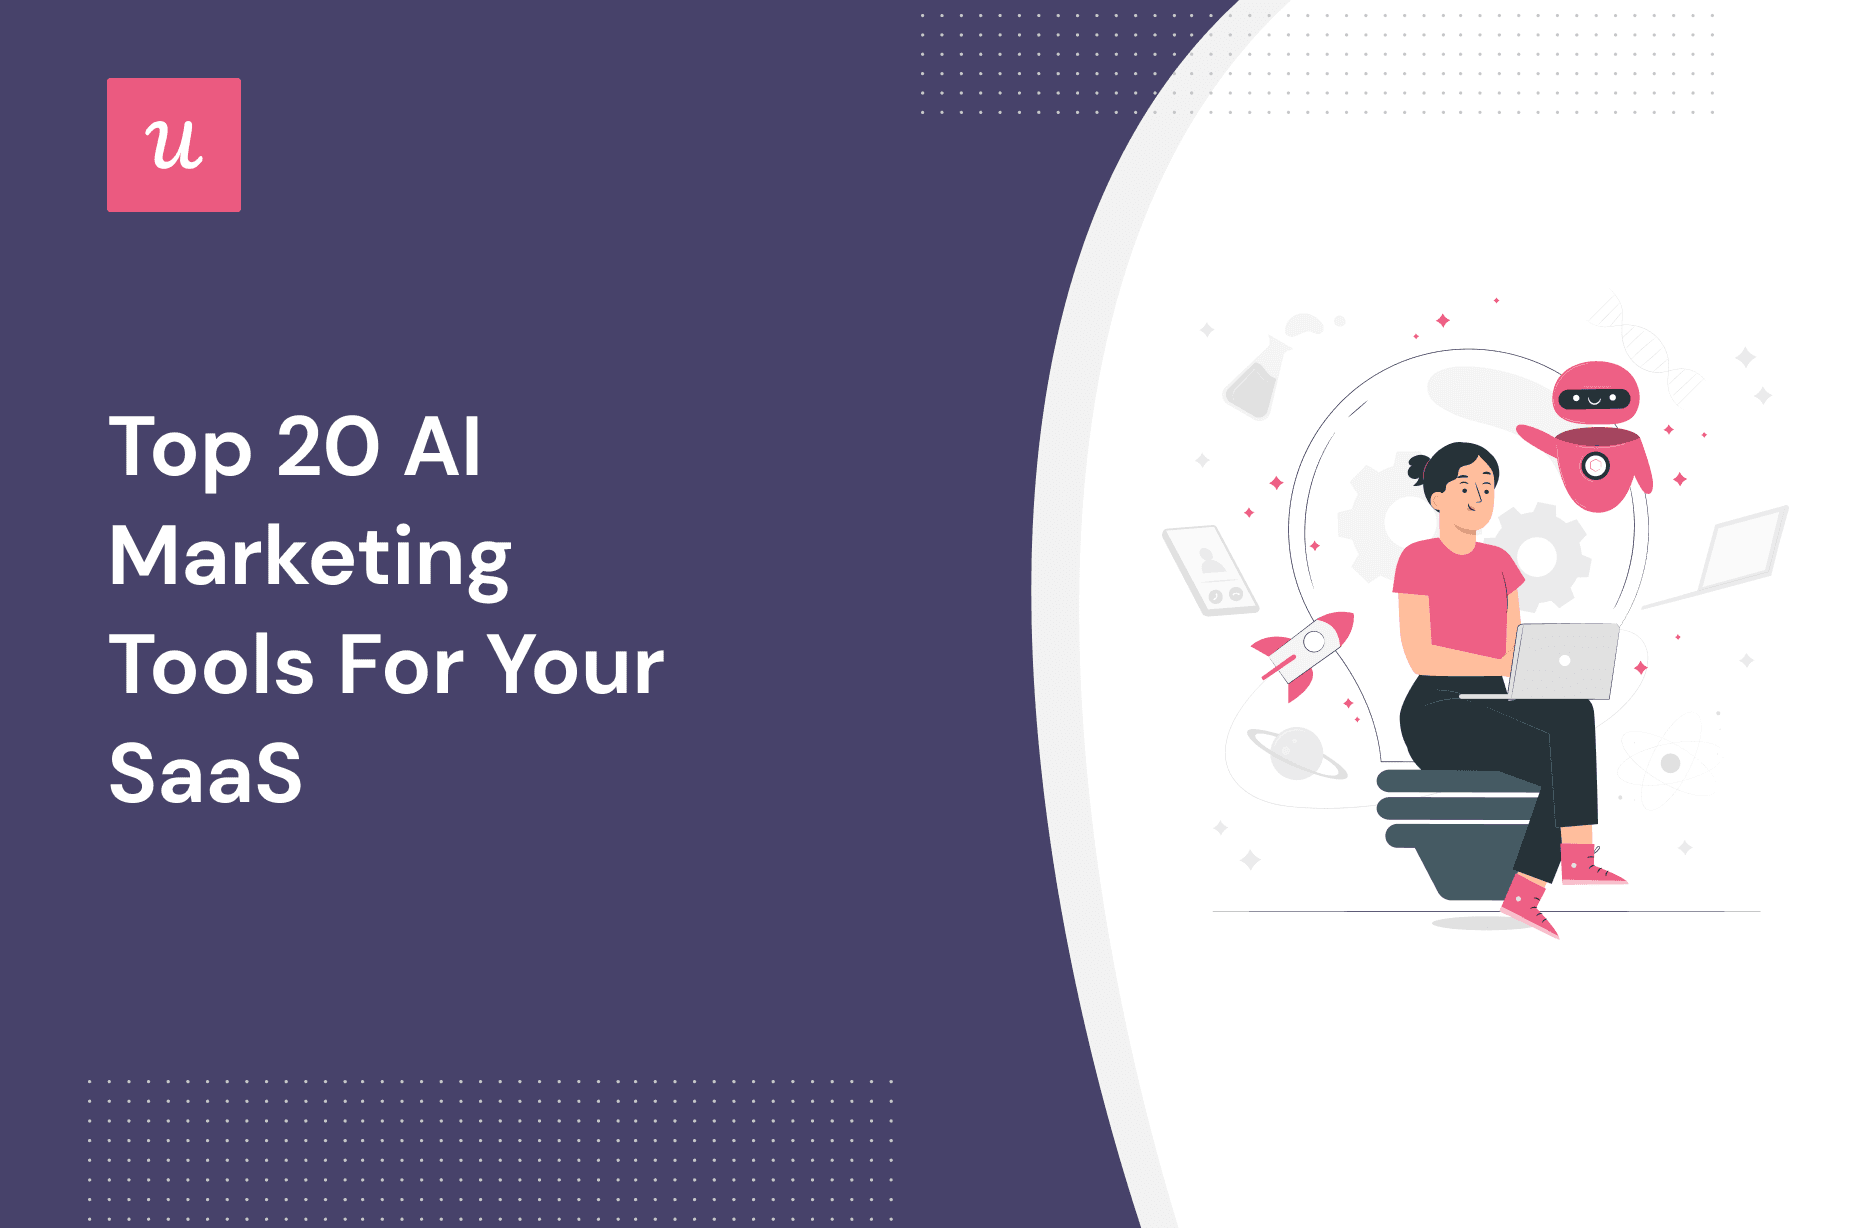 Top 20 AI Marketing Tools for Your SaaS cover